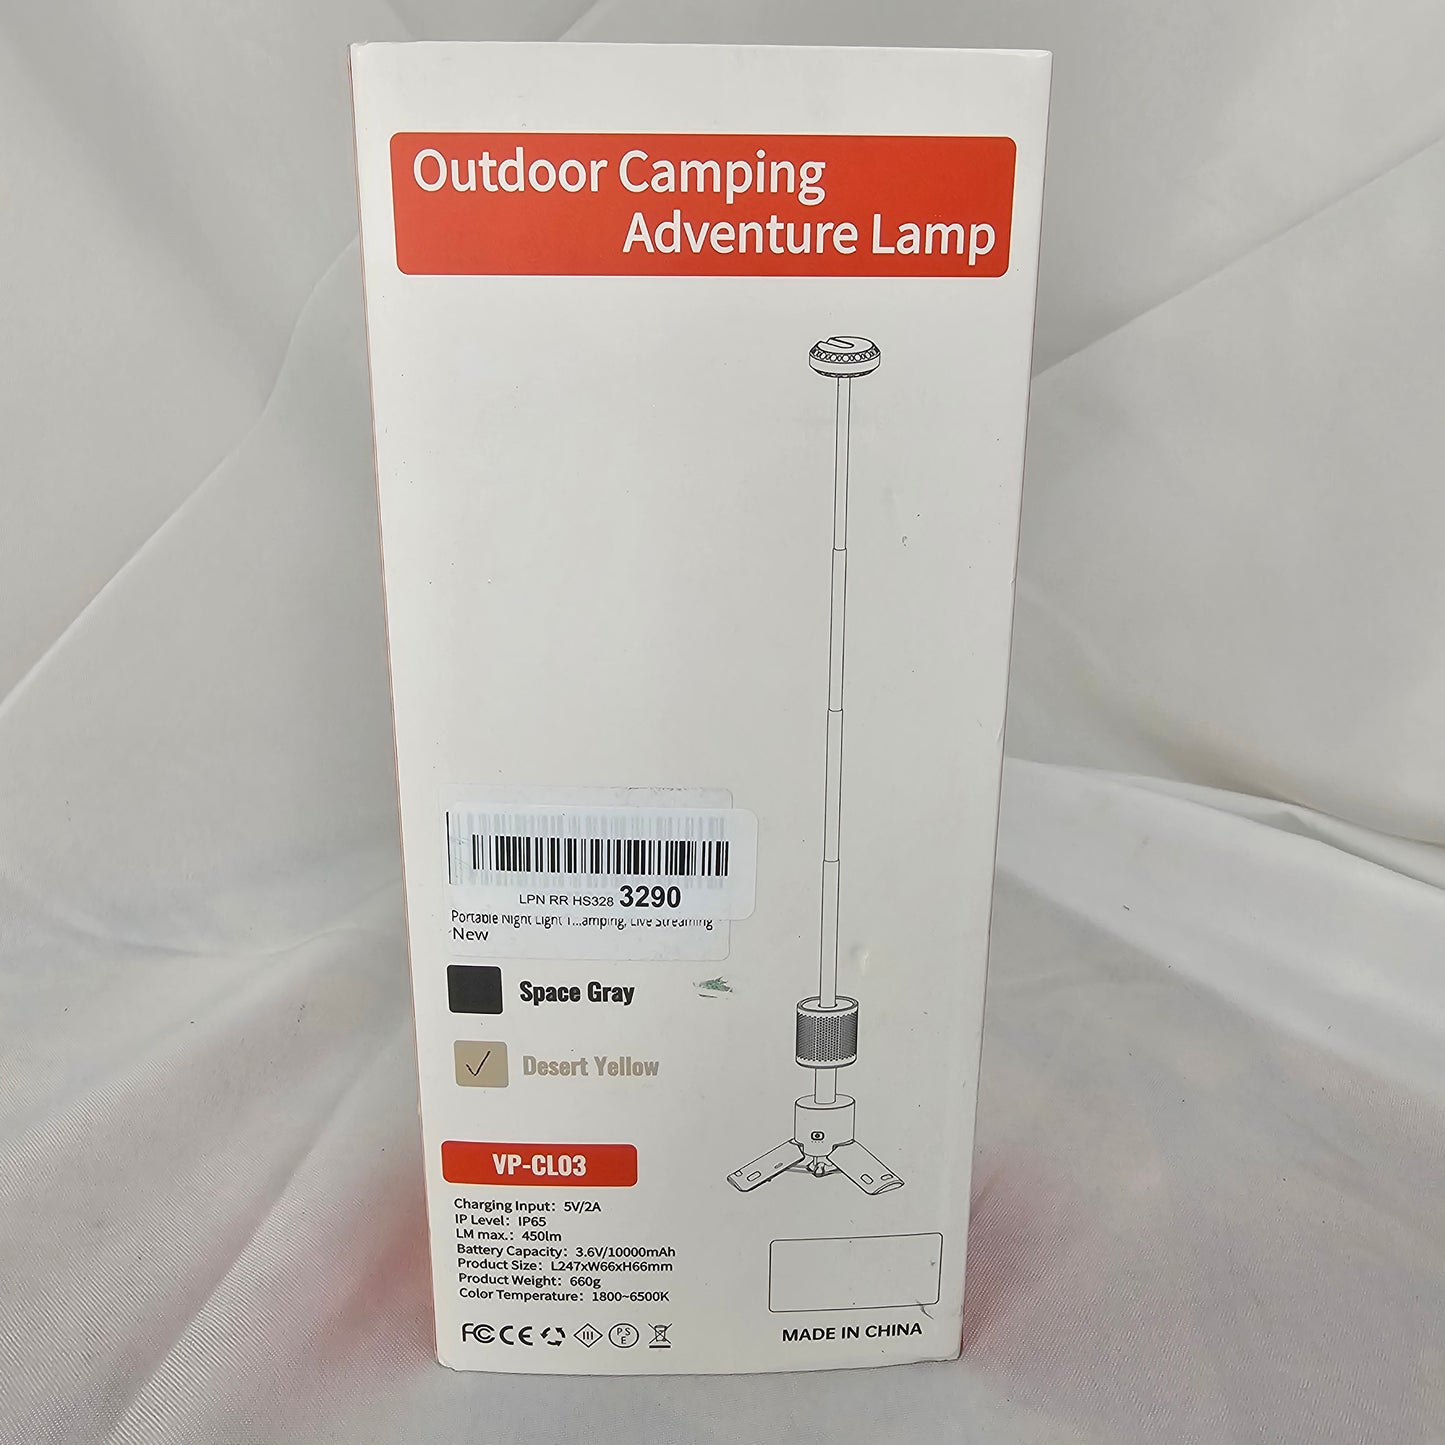 Outdoor Camping Adventure Lamp VP-CL03 - DQ Distribution